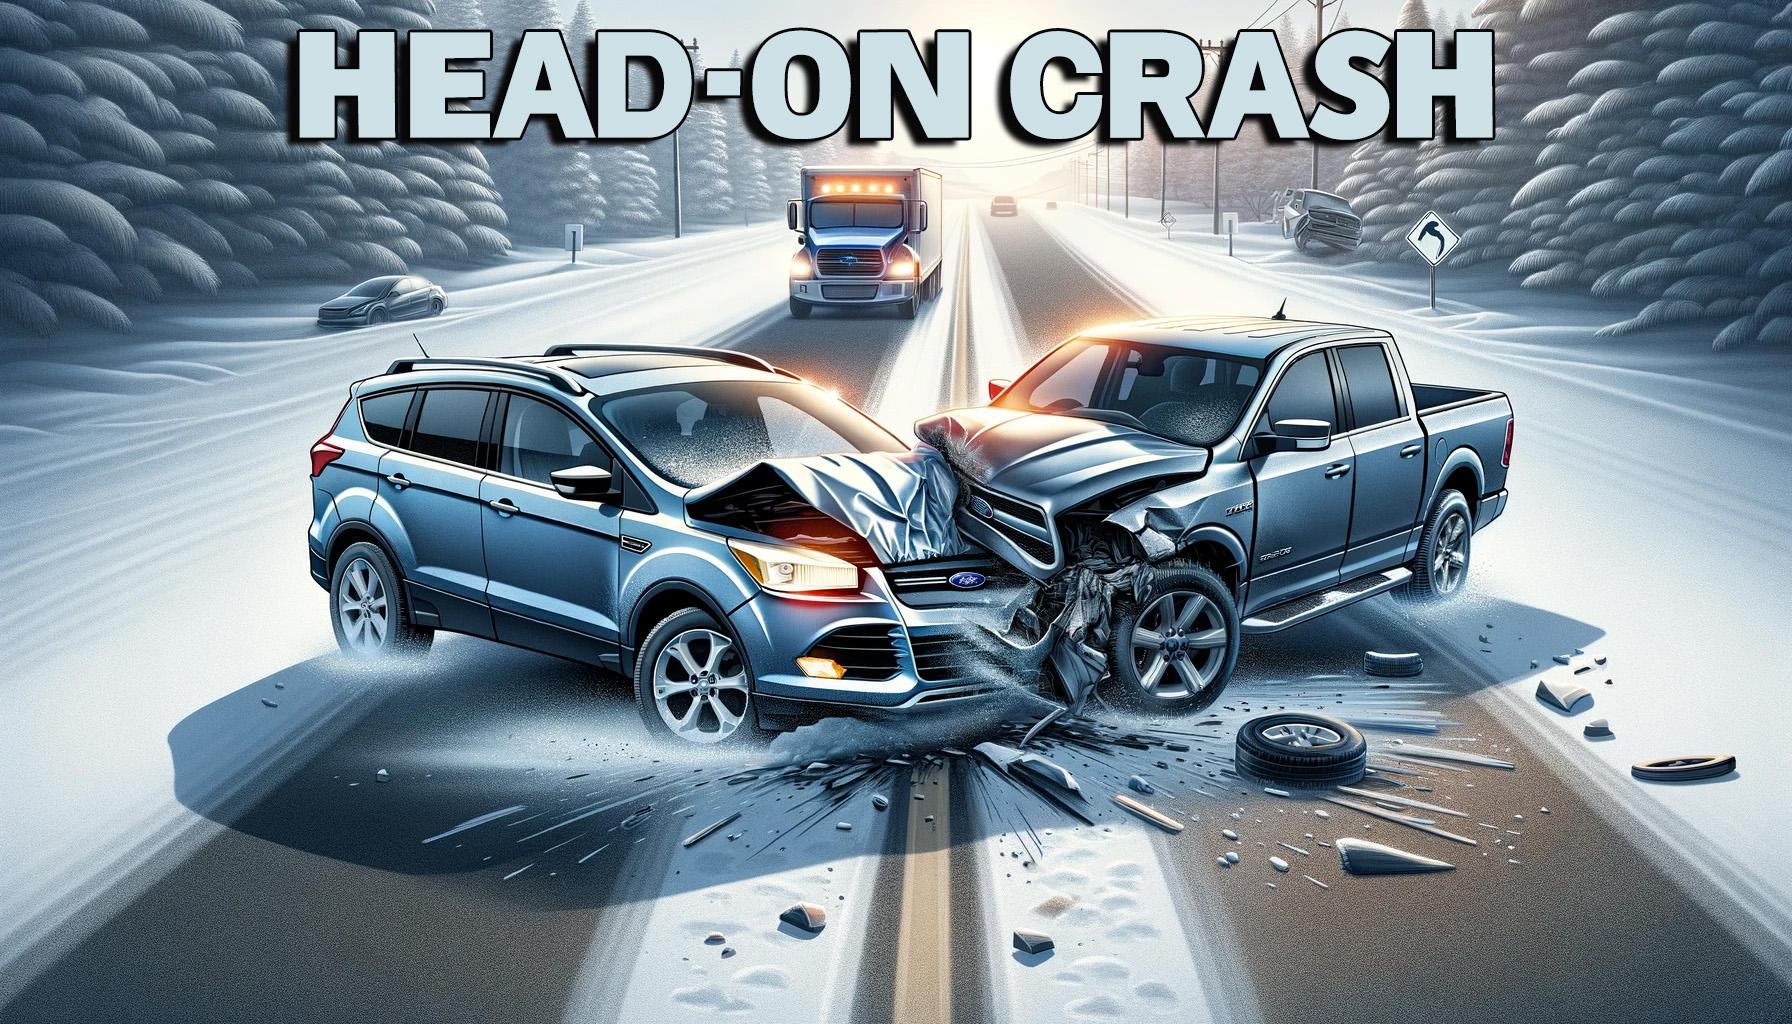 Head-on crash on snow covered road news graphic